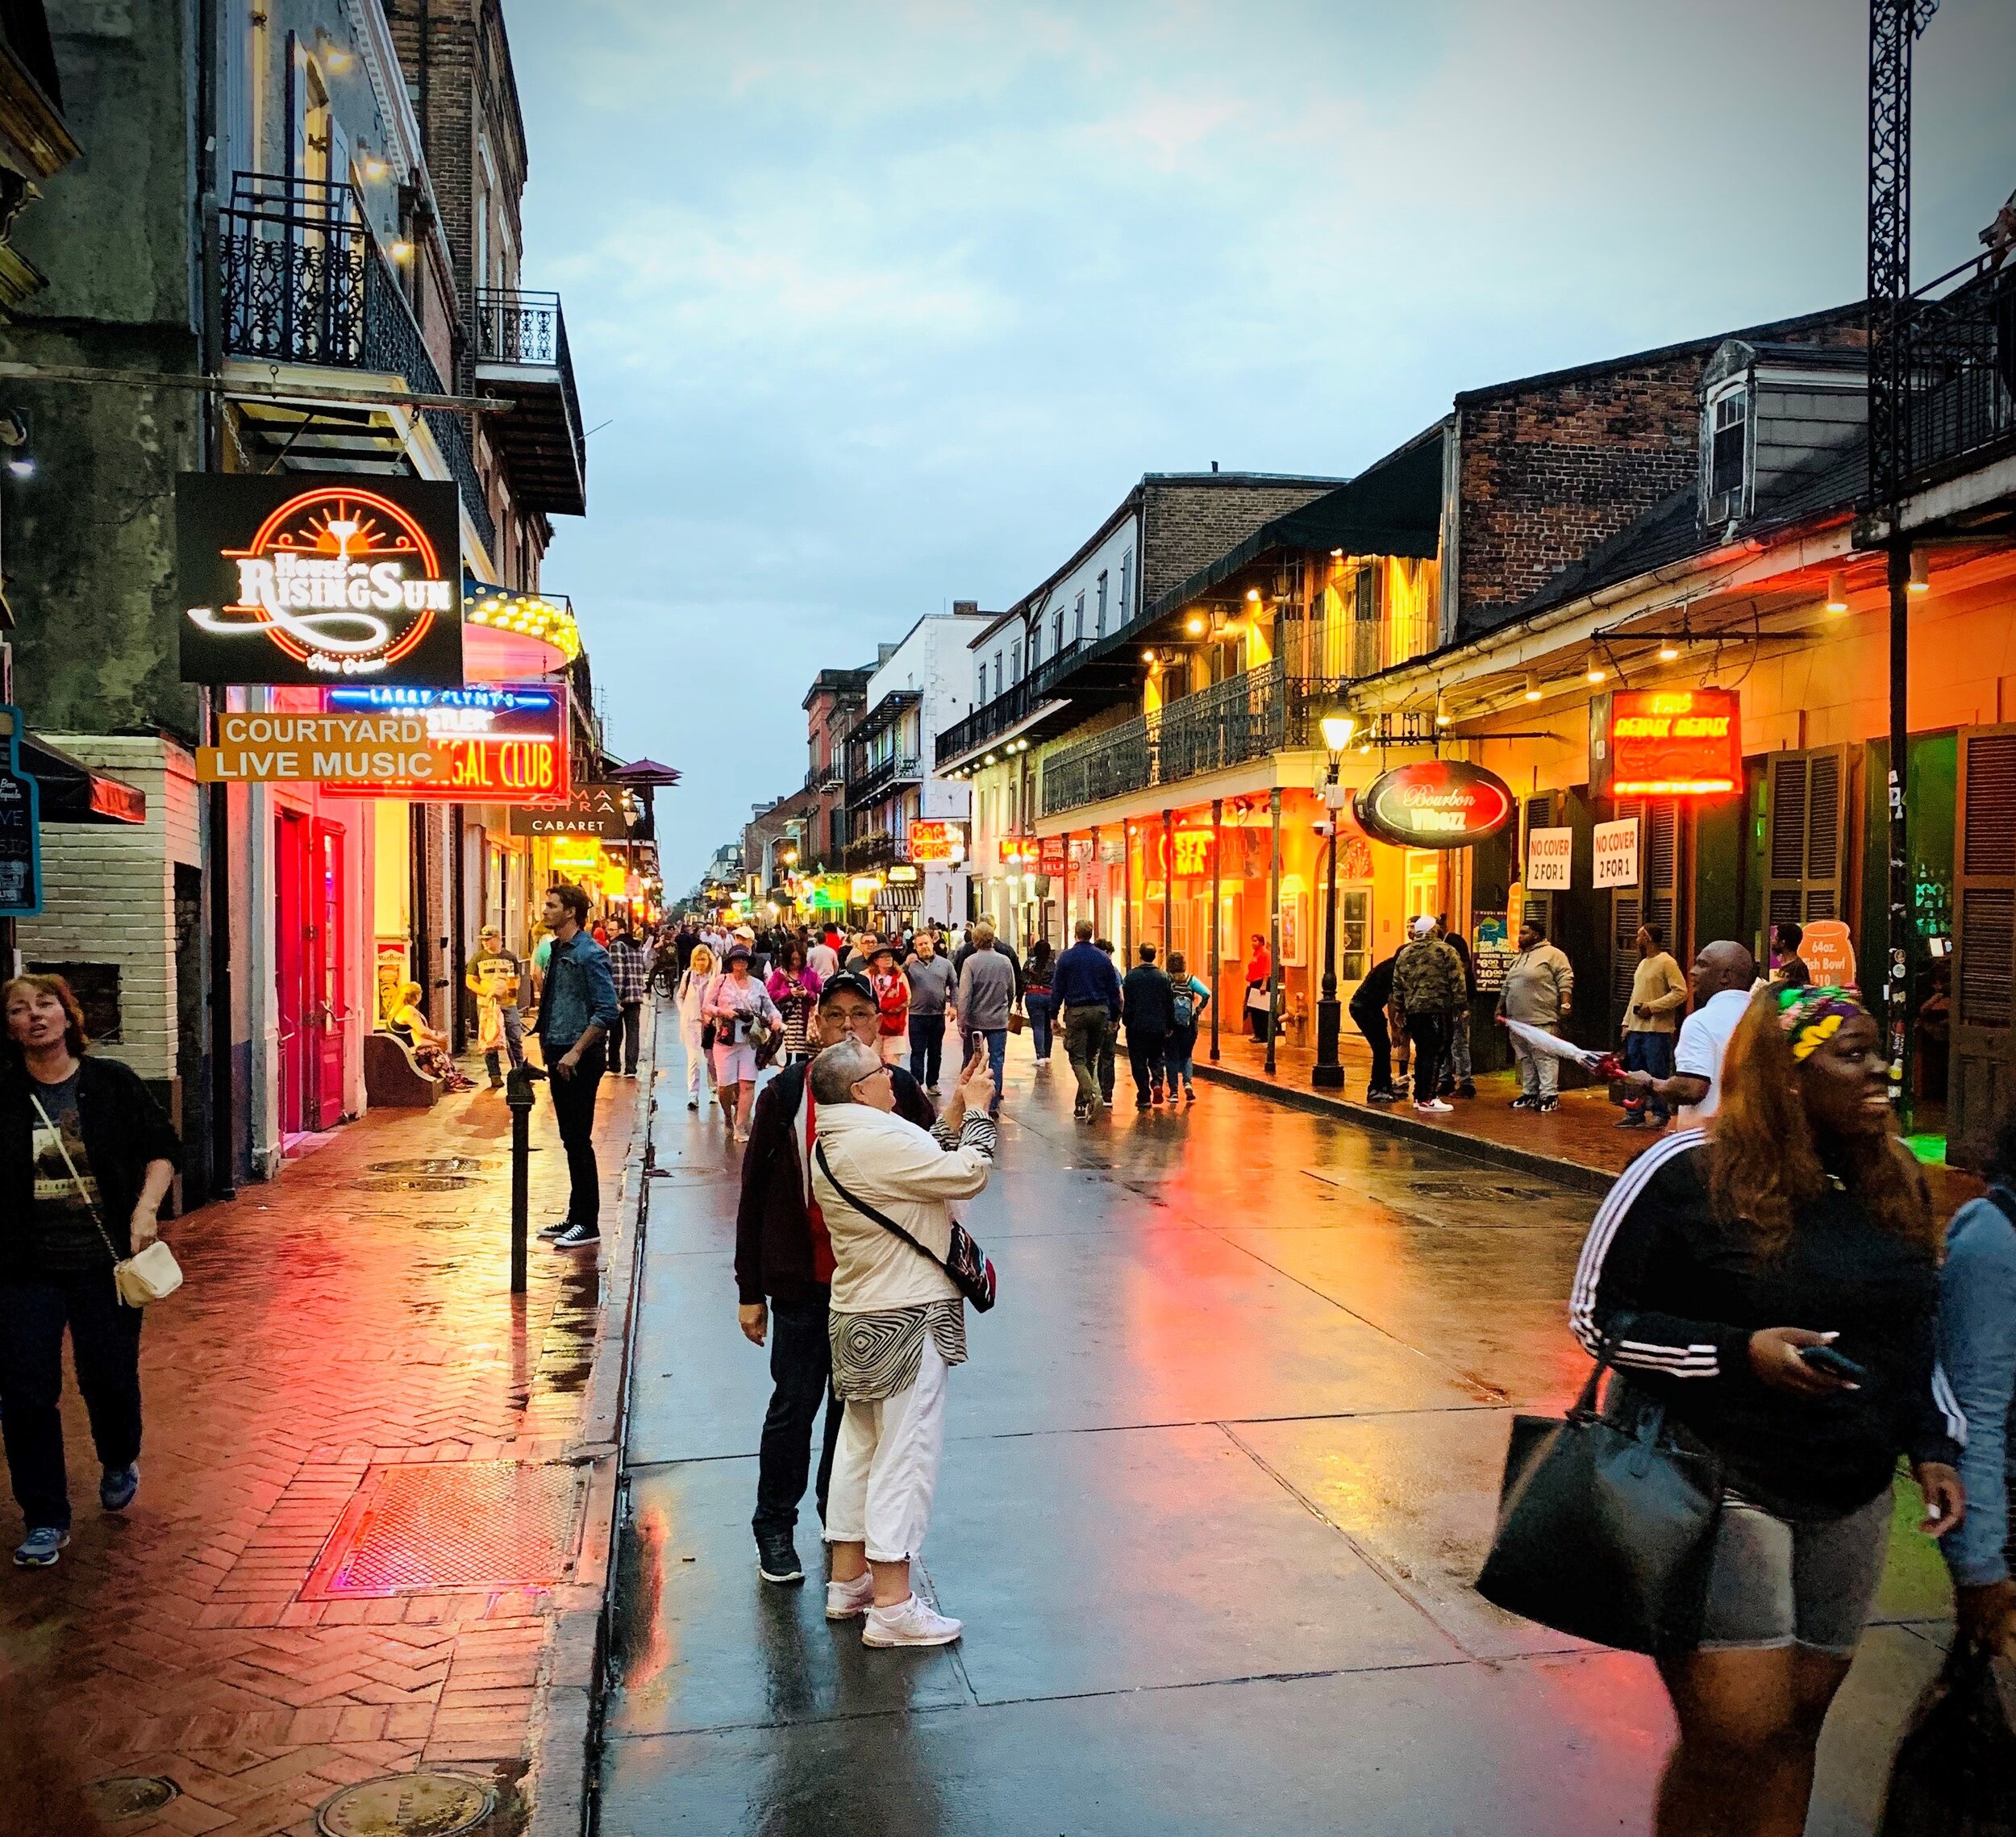  Dinner at Mambo’s on Bourbon Street in New Orleans was delicious. No matter what time of day, there’s always a photo opportunity on Bourbon Street. 